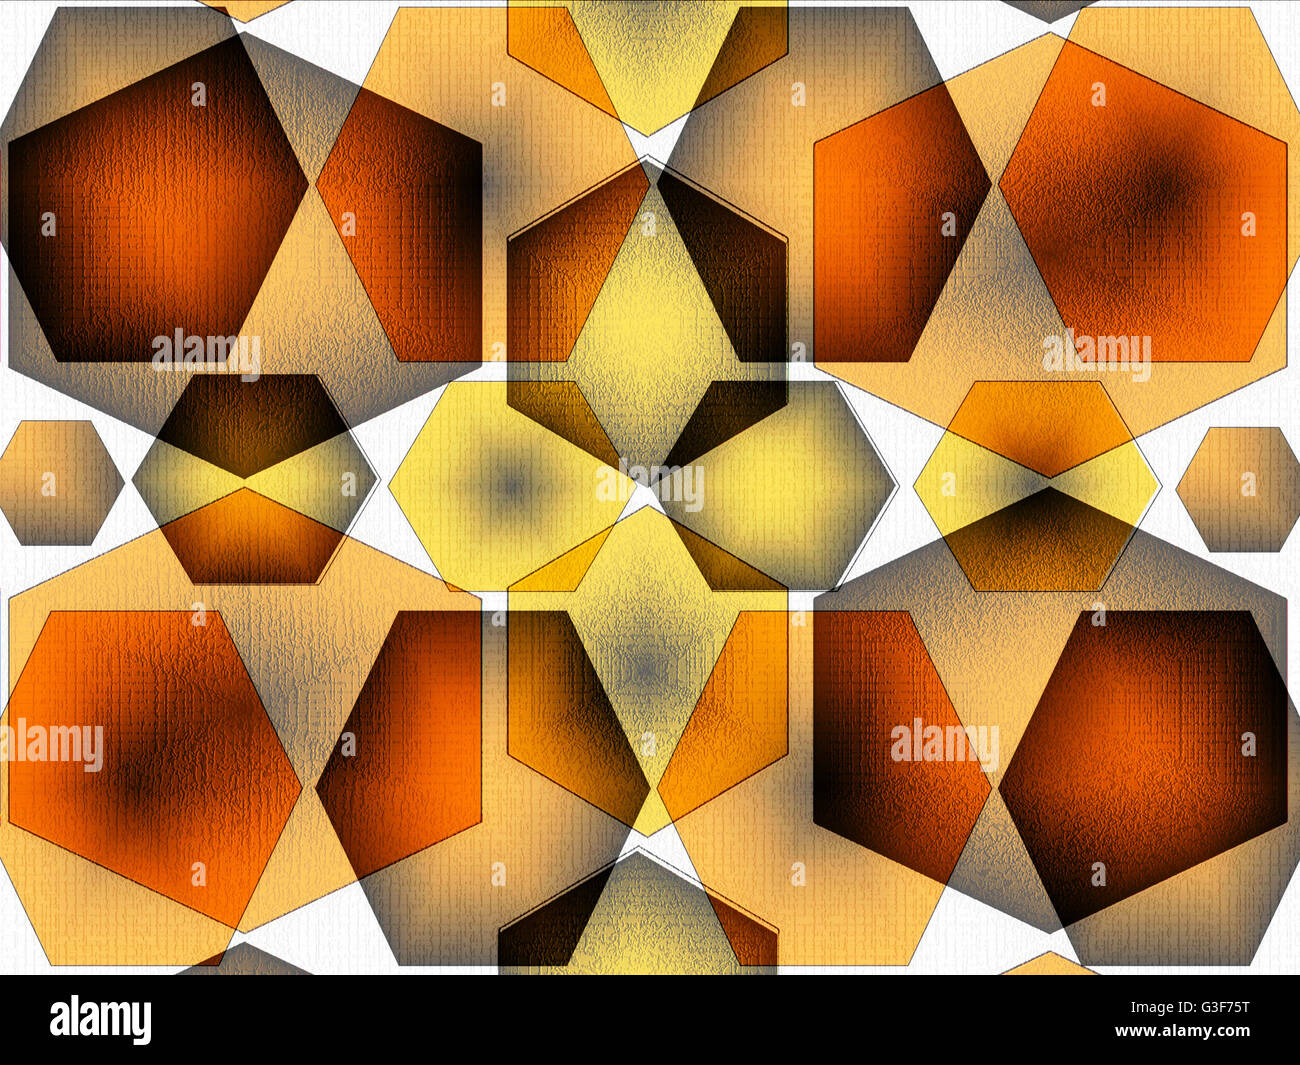 Stunning  unique  colorful   modern  geometric abstract design superimposed  with   rectangular motifs on a  plain background ideal for wallpapers  . Stock Photo